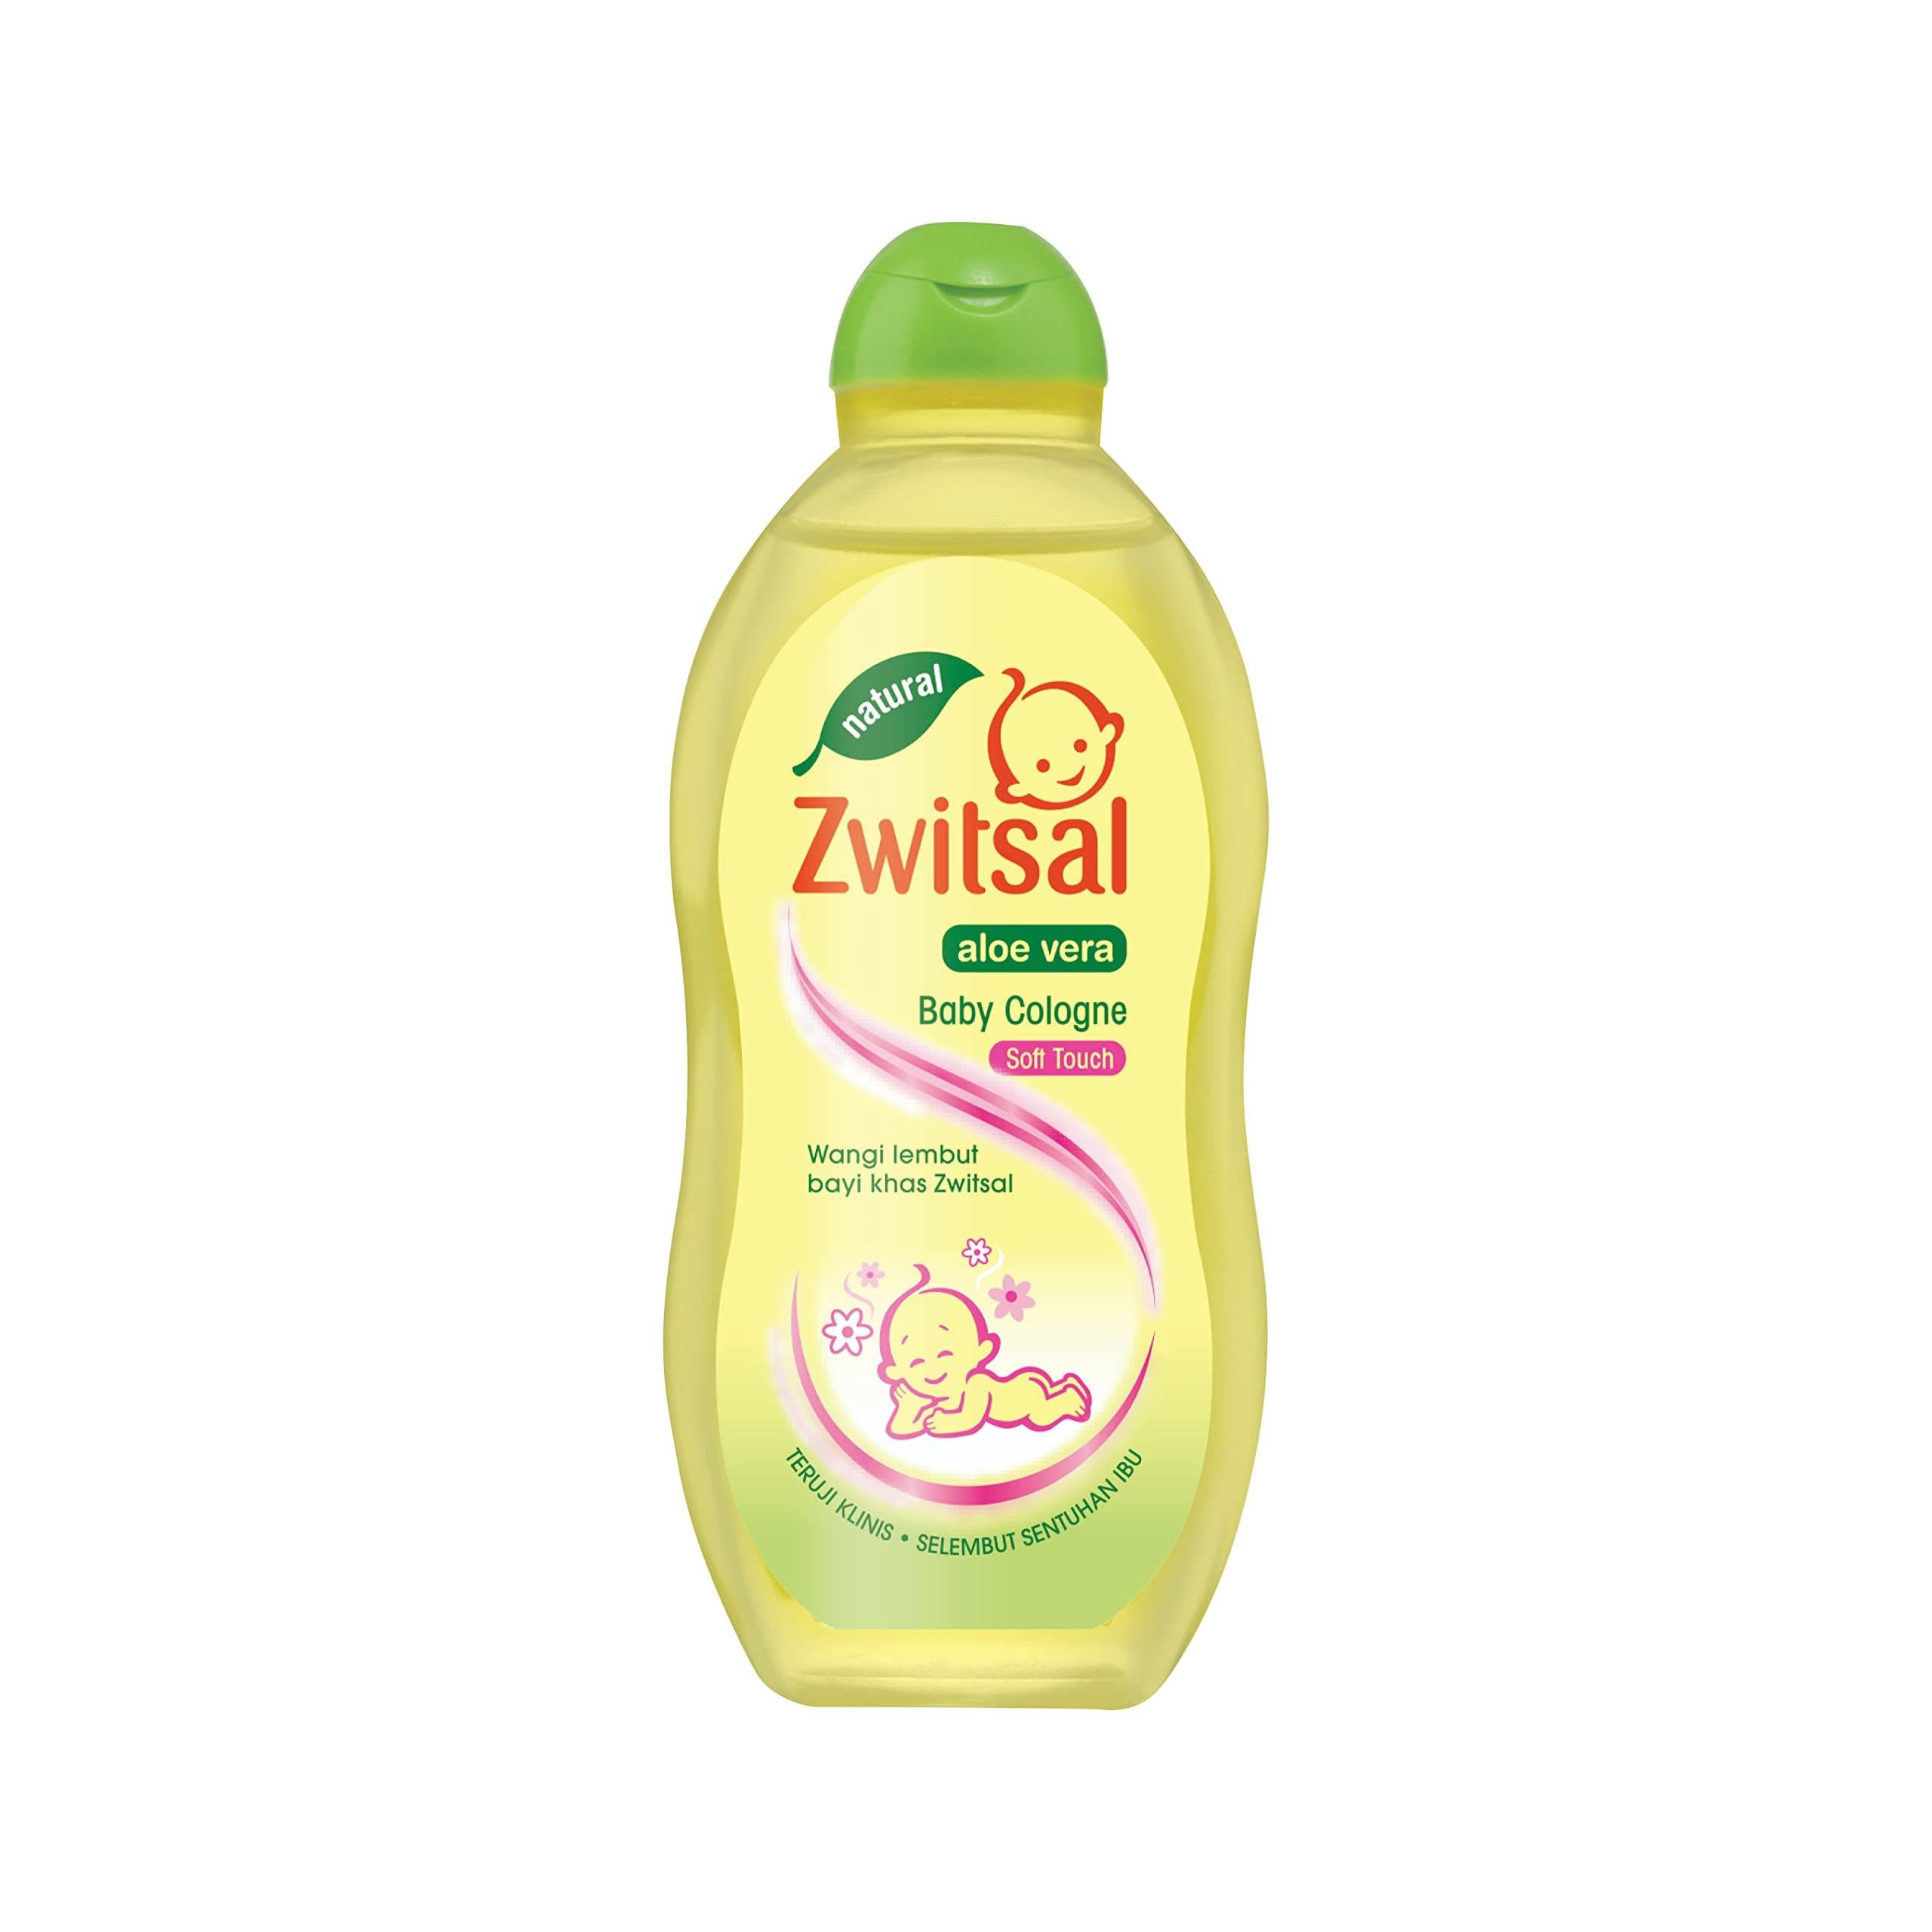 Jans Zwitsal - Baby Cologne with Aloe Vera | Soft Touch | 100ml